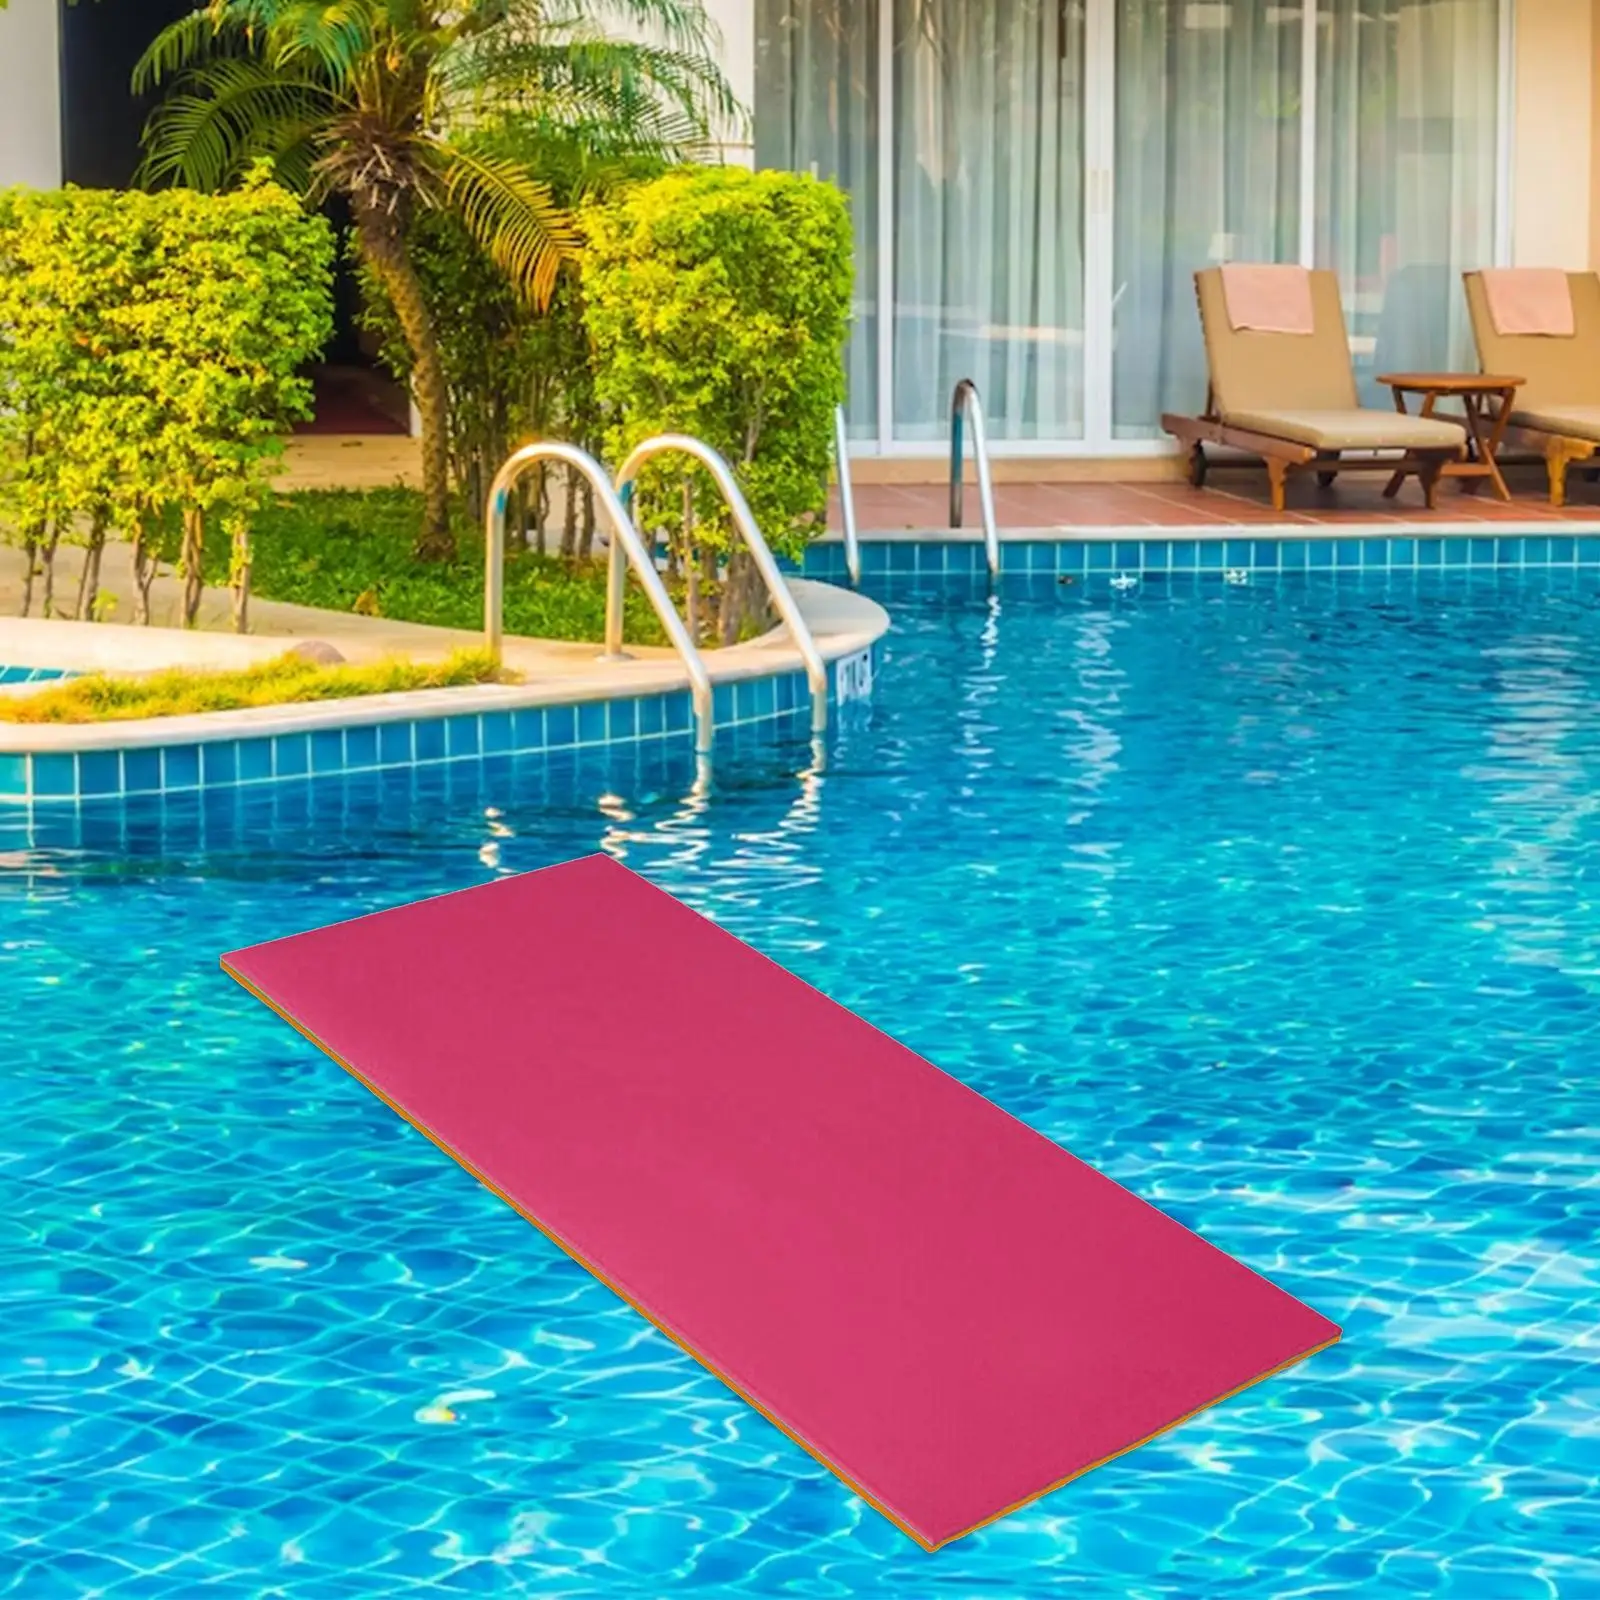 Water Floating Mat 2 Layers Water Recreation Float Blanket Pool Floating Raft for Swimming Pool River Summer Outdoor